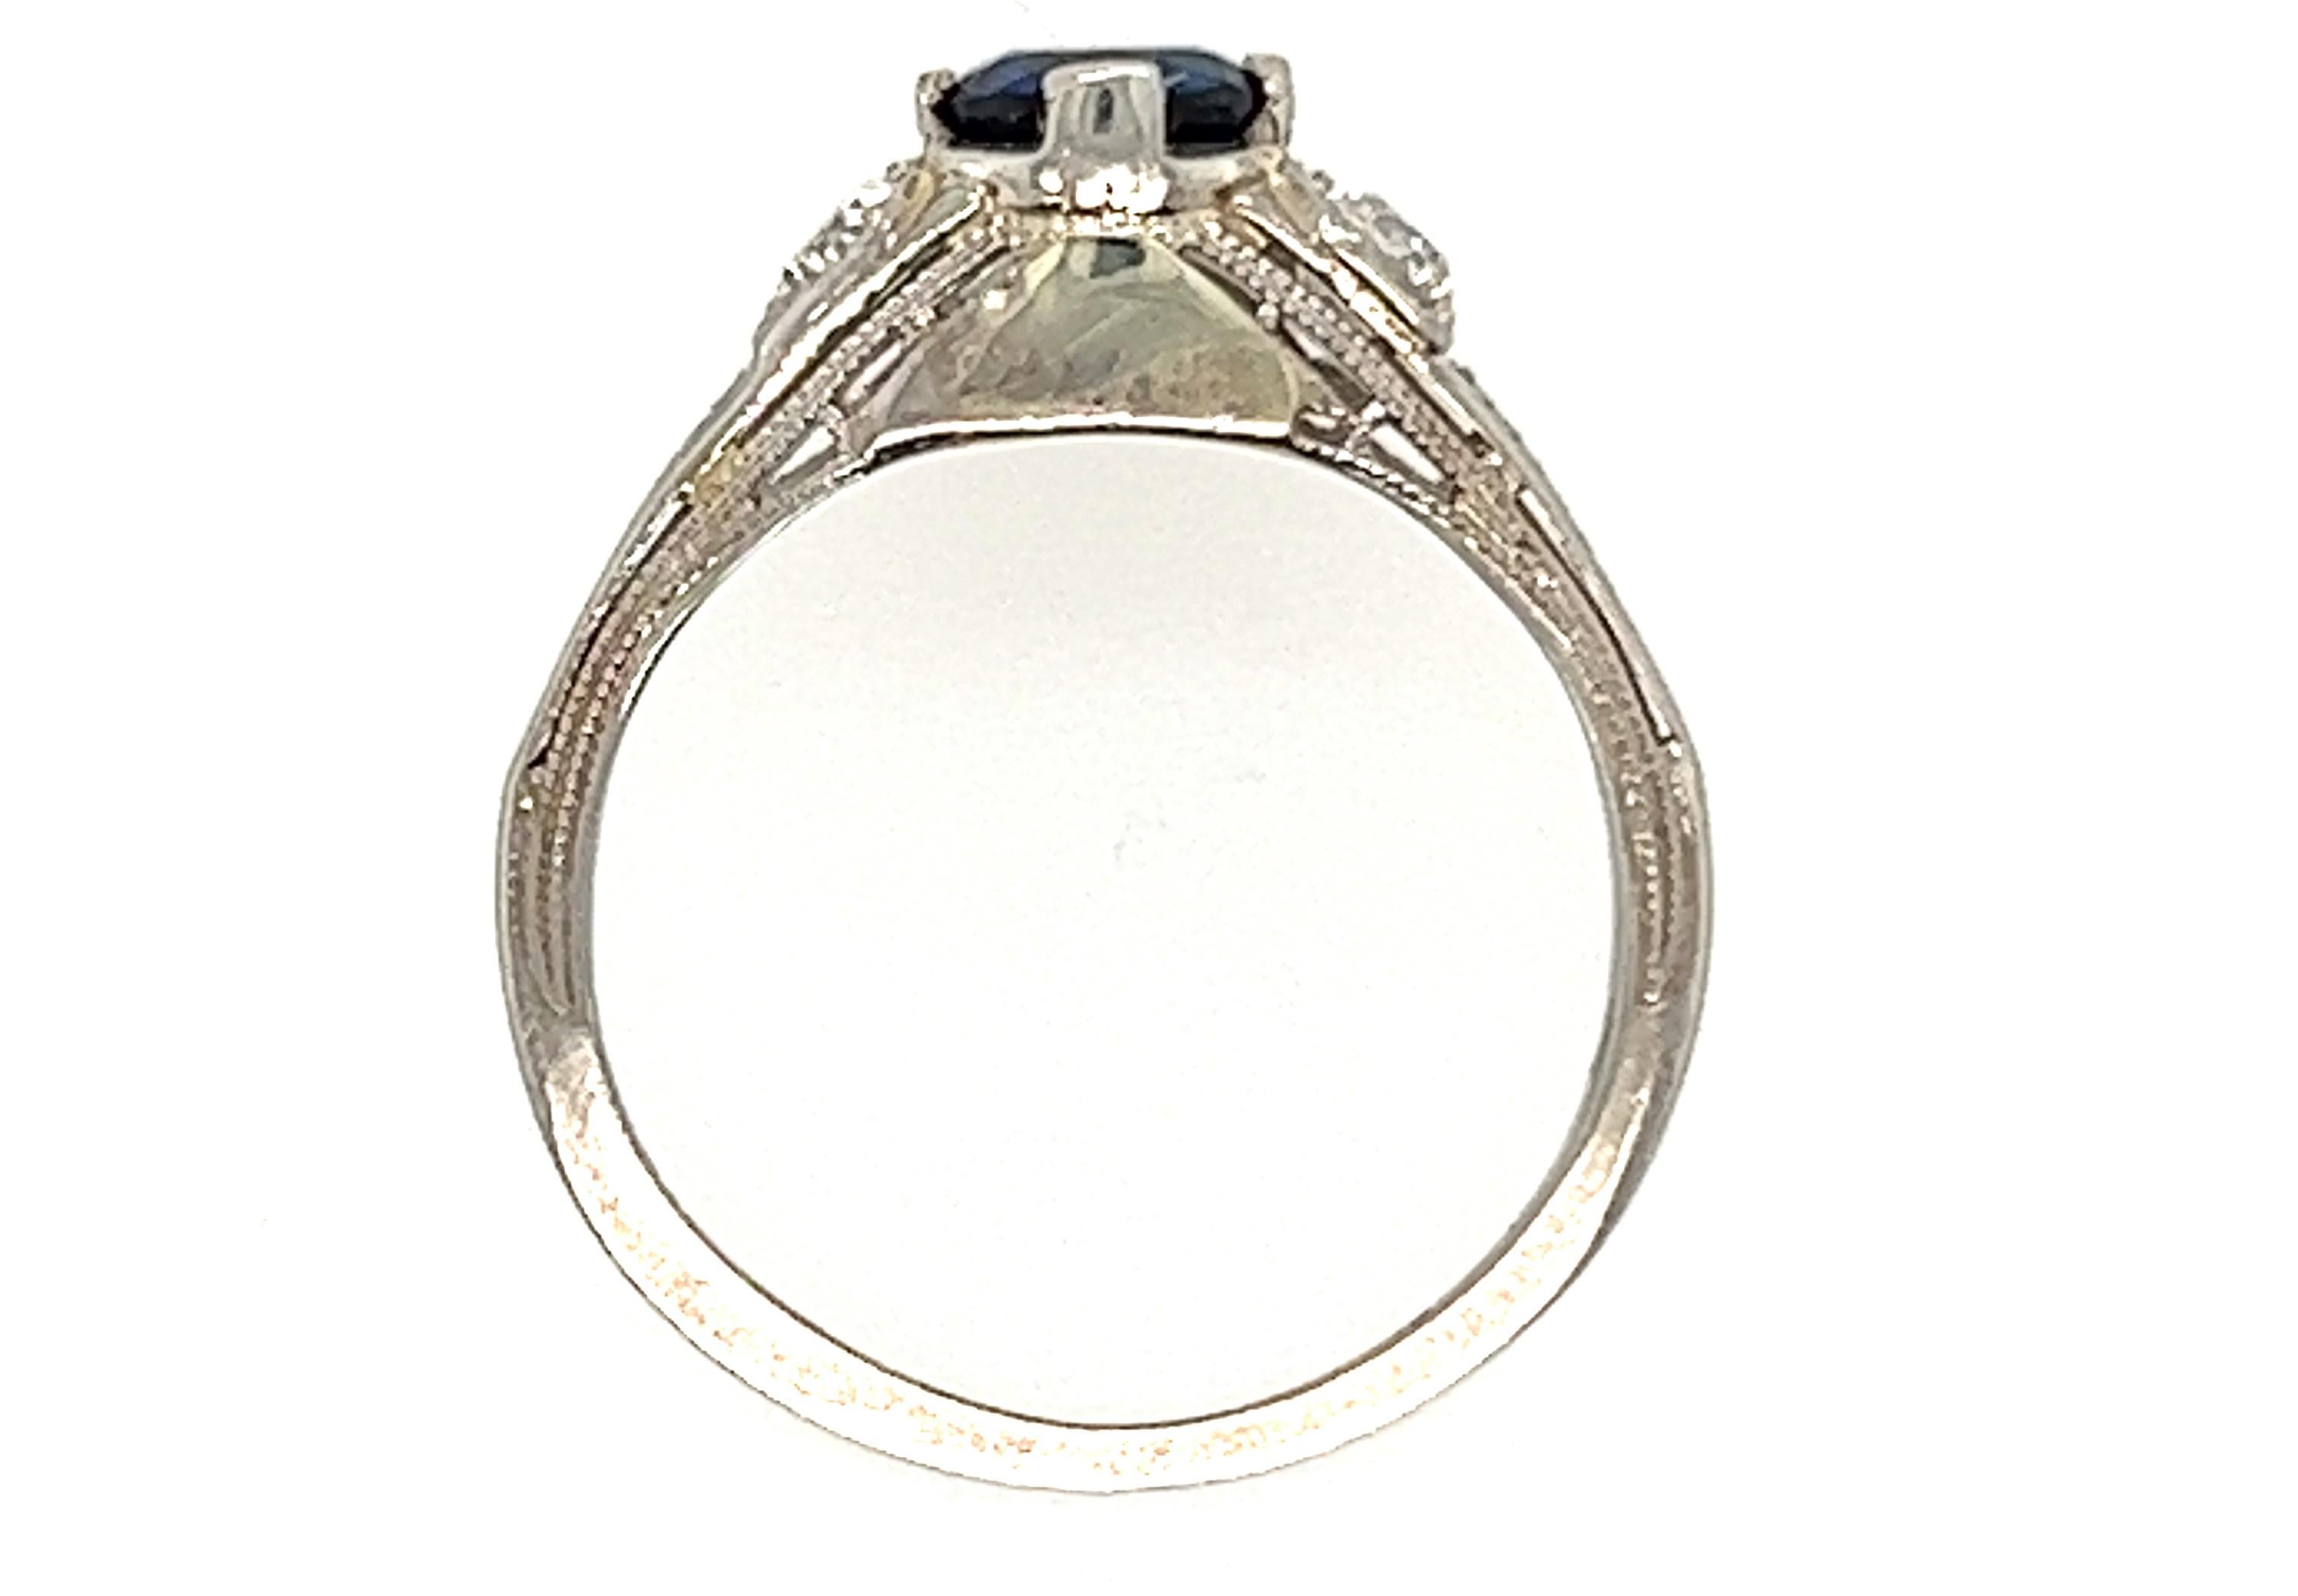 Genuine Original Art Deco Baskin Brothers Antique from 1930's Vintage Sapphire Diamond Ring .86ct 18K White Gold 


Featuring a Midnight Blue .61 Carat Genuine Natural Round Sapphire Center

2 Large Genuine Old European Cut Natural Mined Diamonds